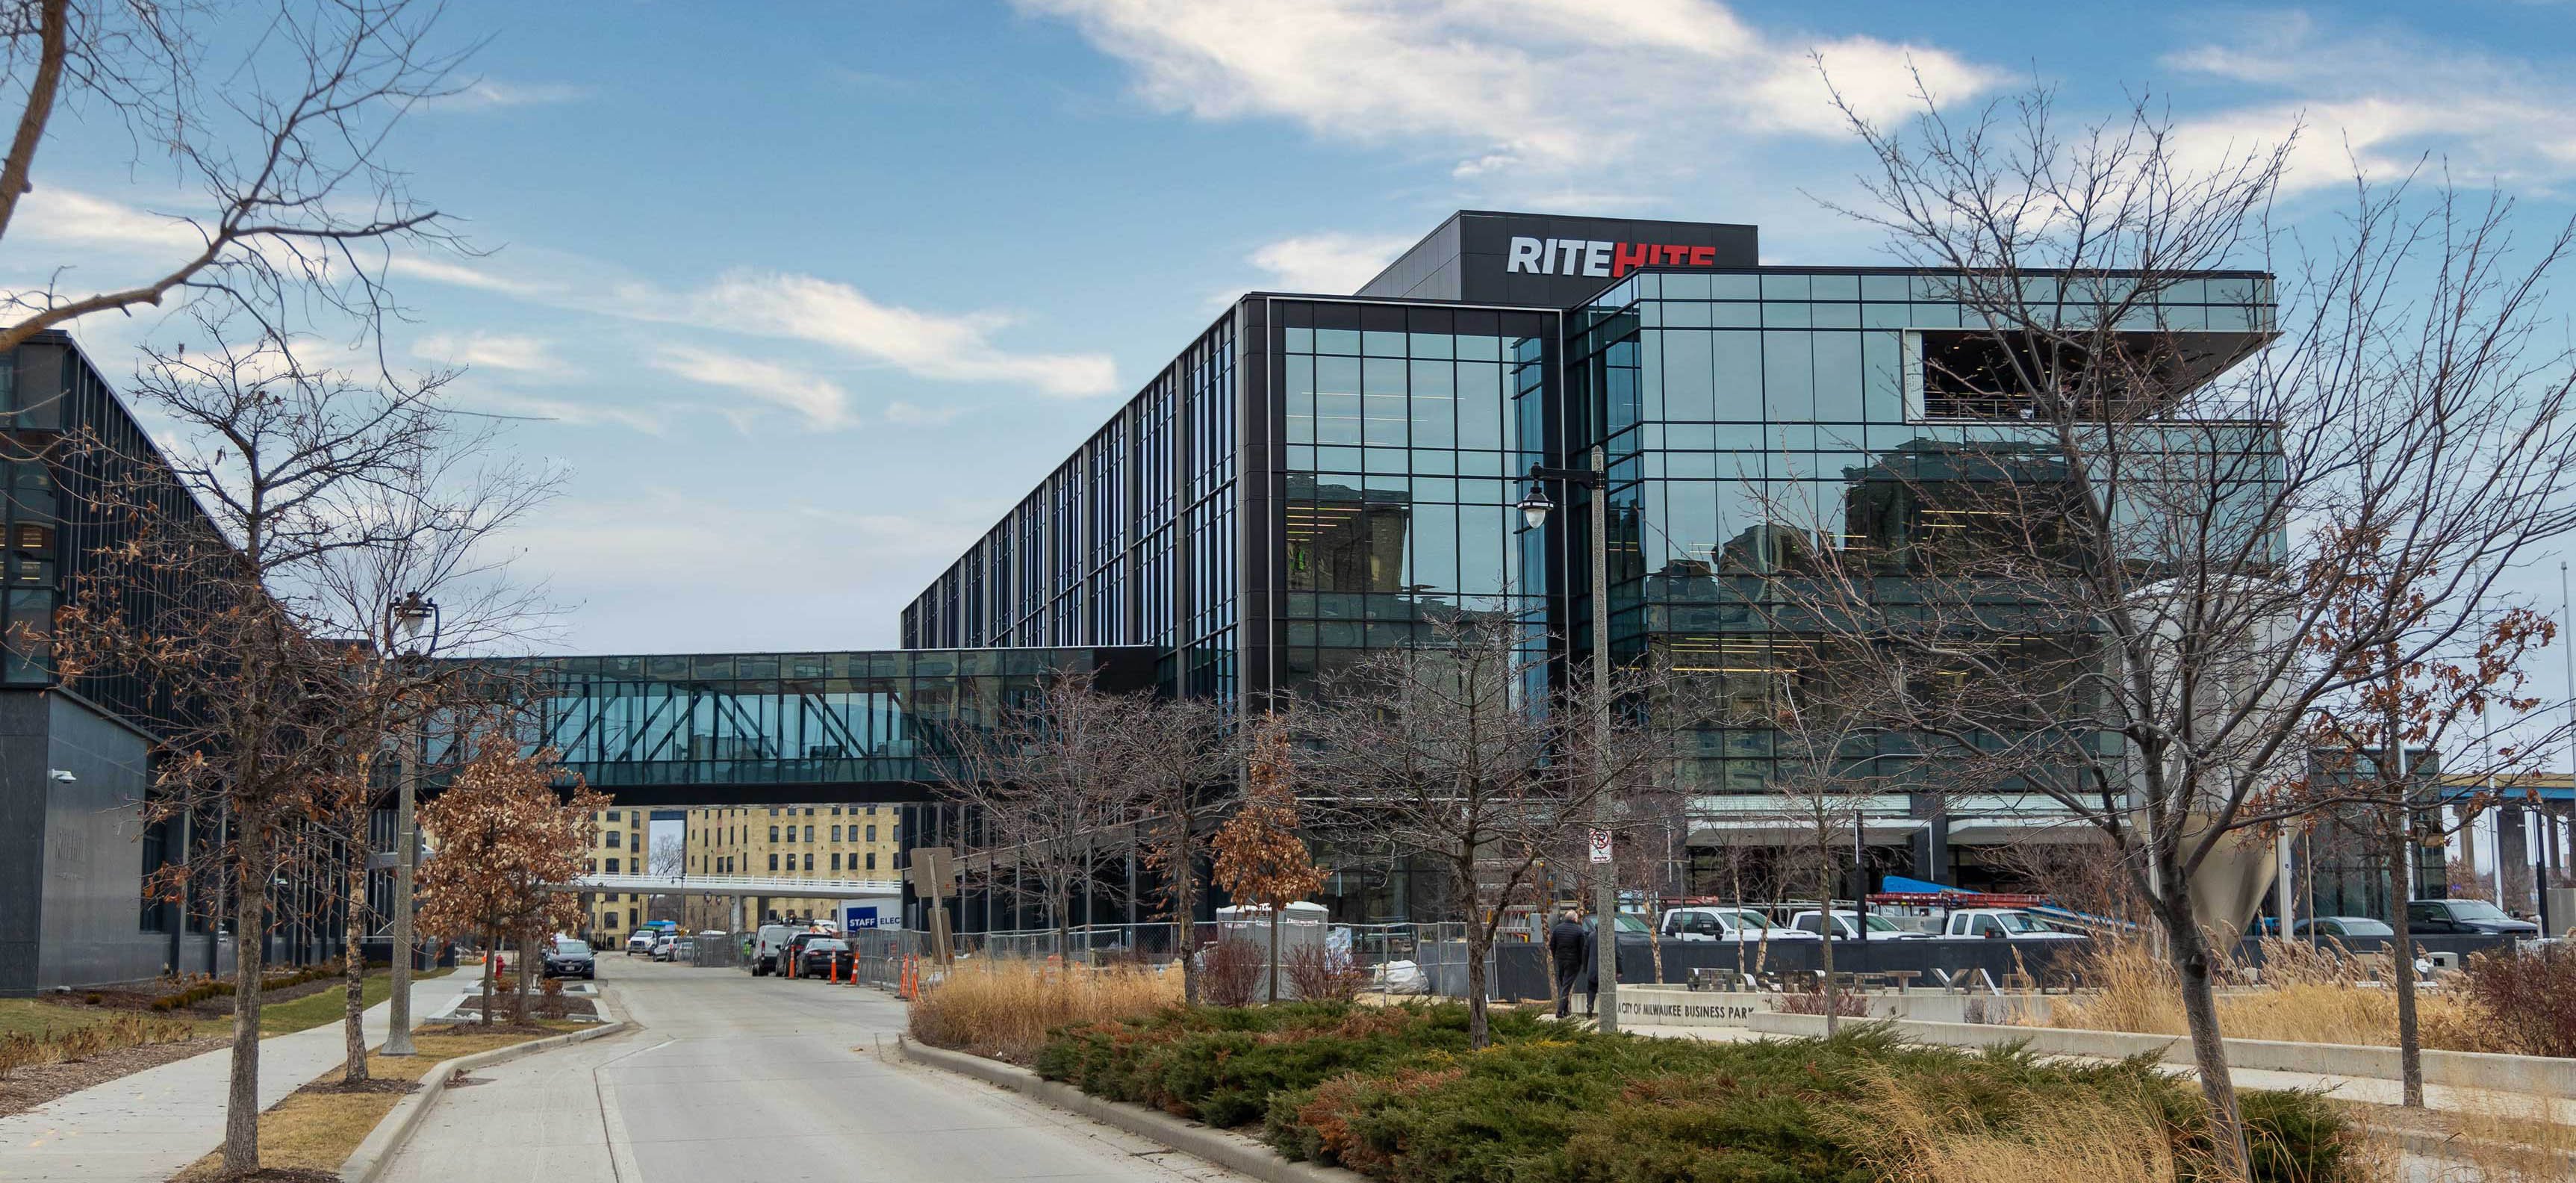 Rite-Hite exterior facade picture from road upon construction completion by CD Smith CS0A7620_Final